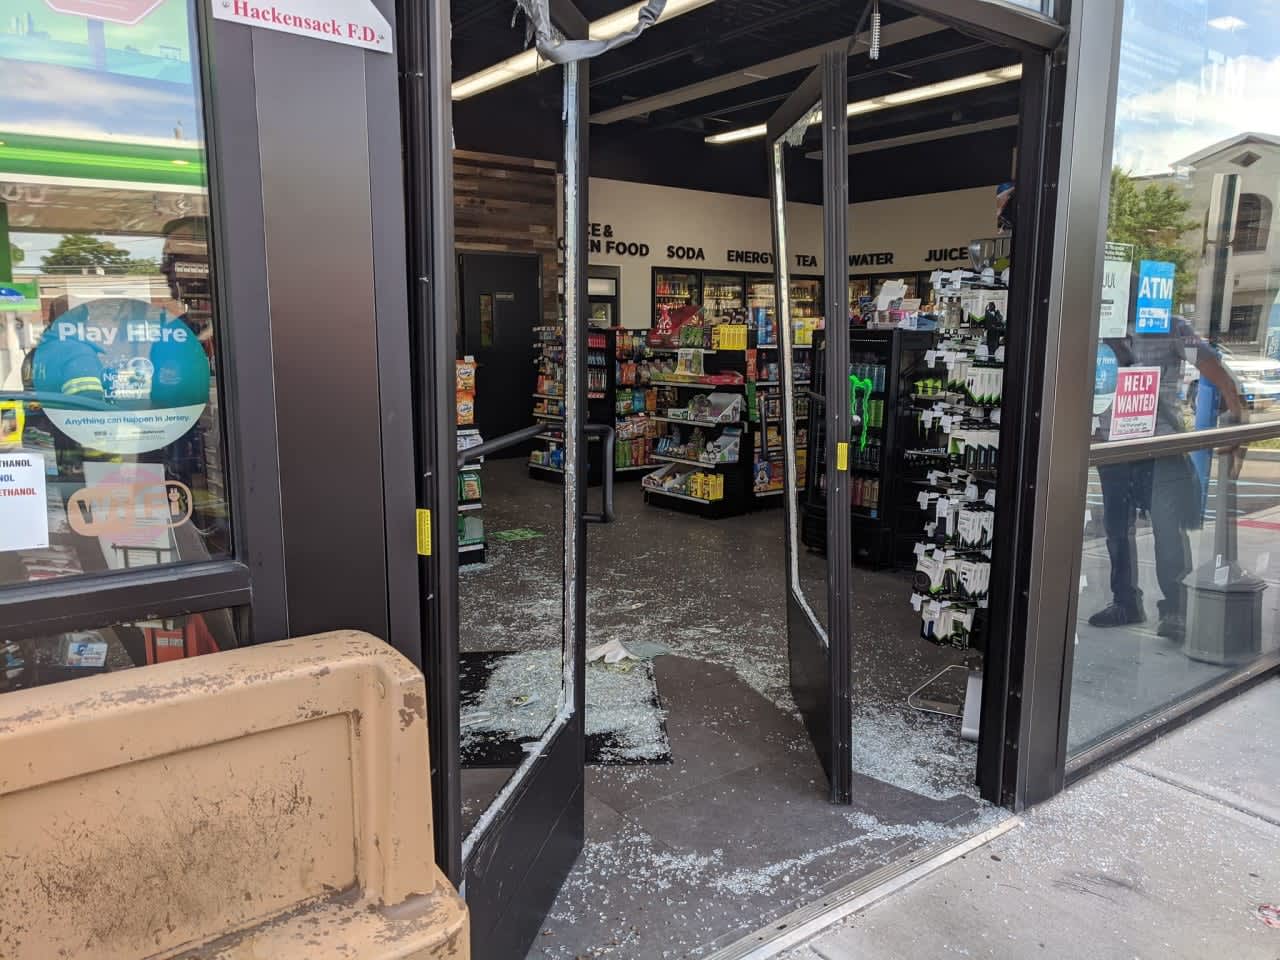 The building housing the gas station's convenience store on South River Street in Hackensack remained structurally sound but with significant damage.